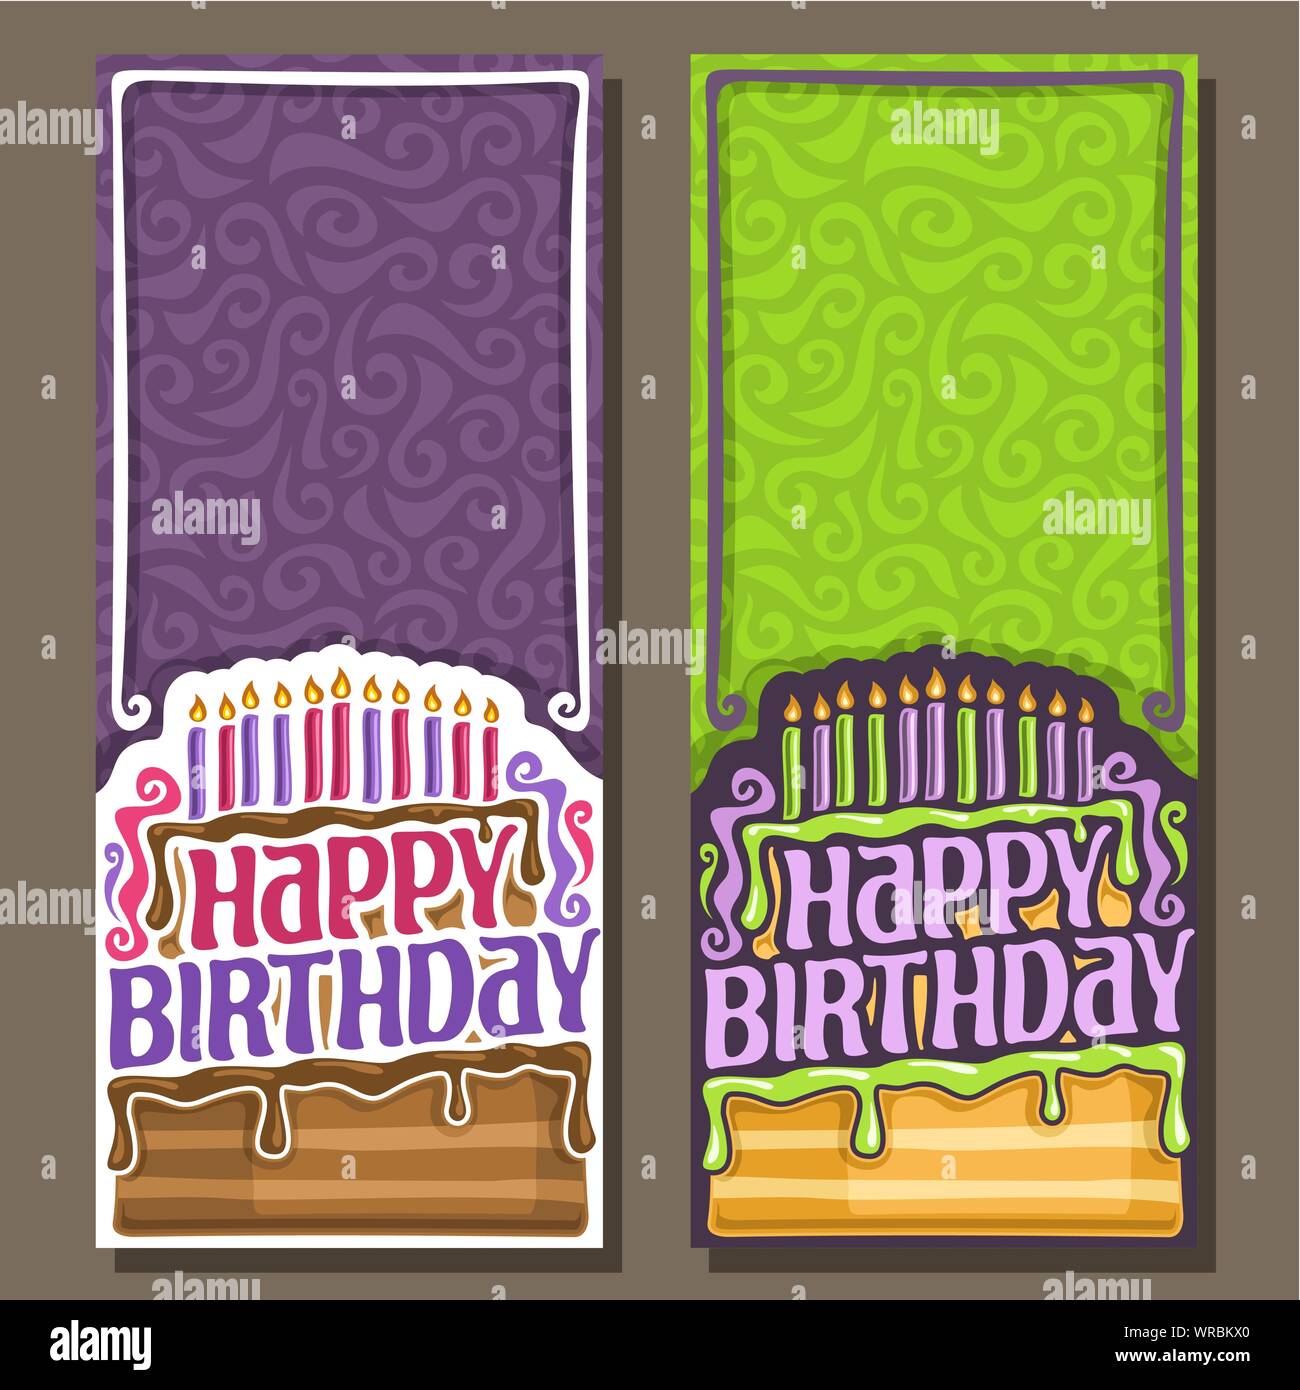 Vector vertical cards for Happy Birthday: 11 burning candles on celebration cake with drip chocolate, greeting lettering happy birthday on curly backg Stock Vector